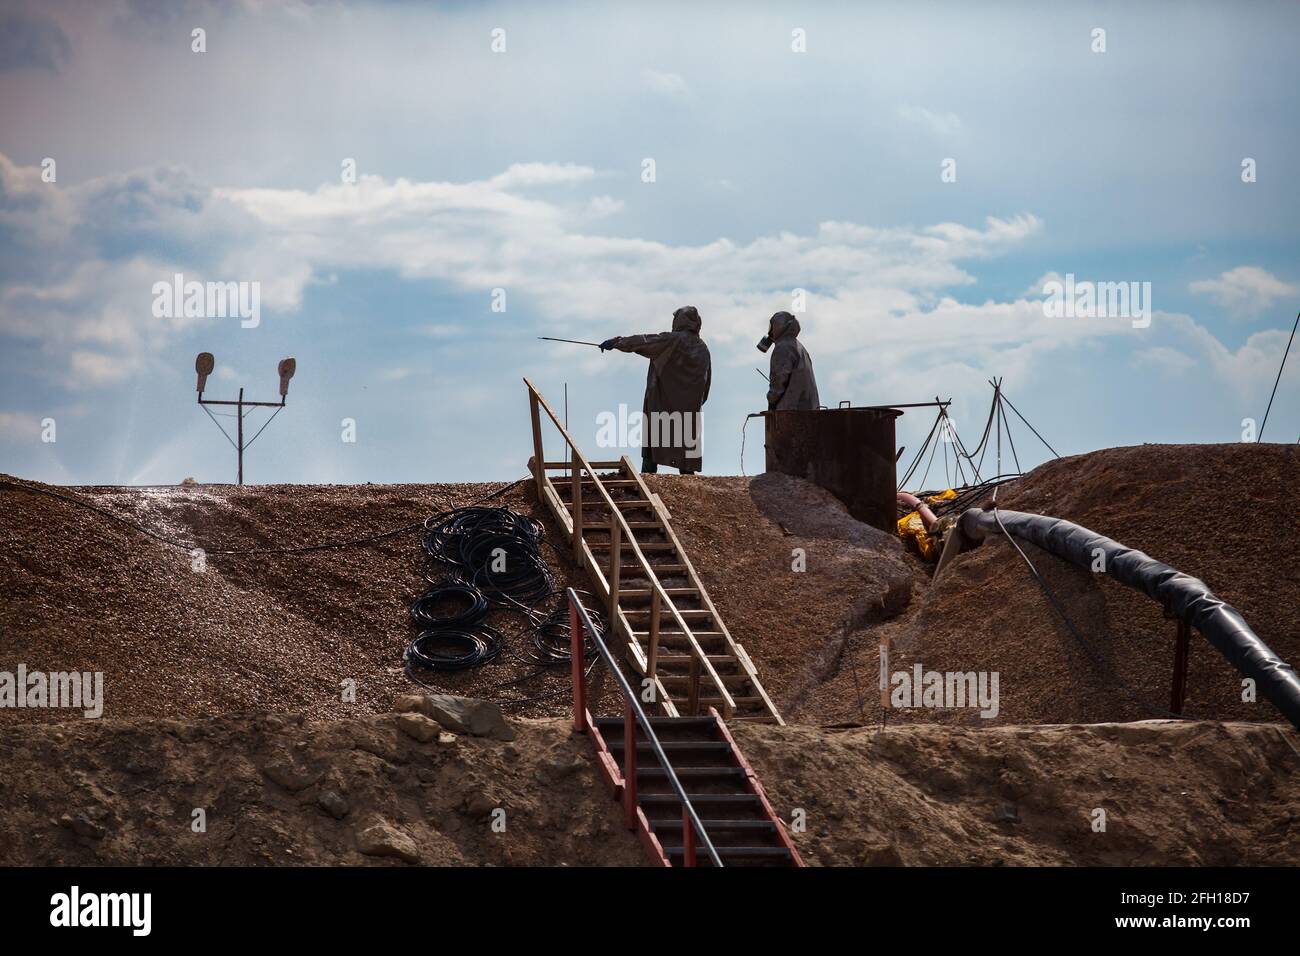 Mining and processing plant. Chemist use potassium cyanide for gold refining. Hazmat suits and gas masks. Almaty region, Kazakhstan. Stock Photo